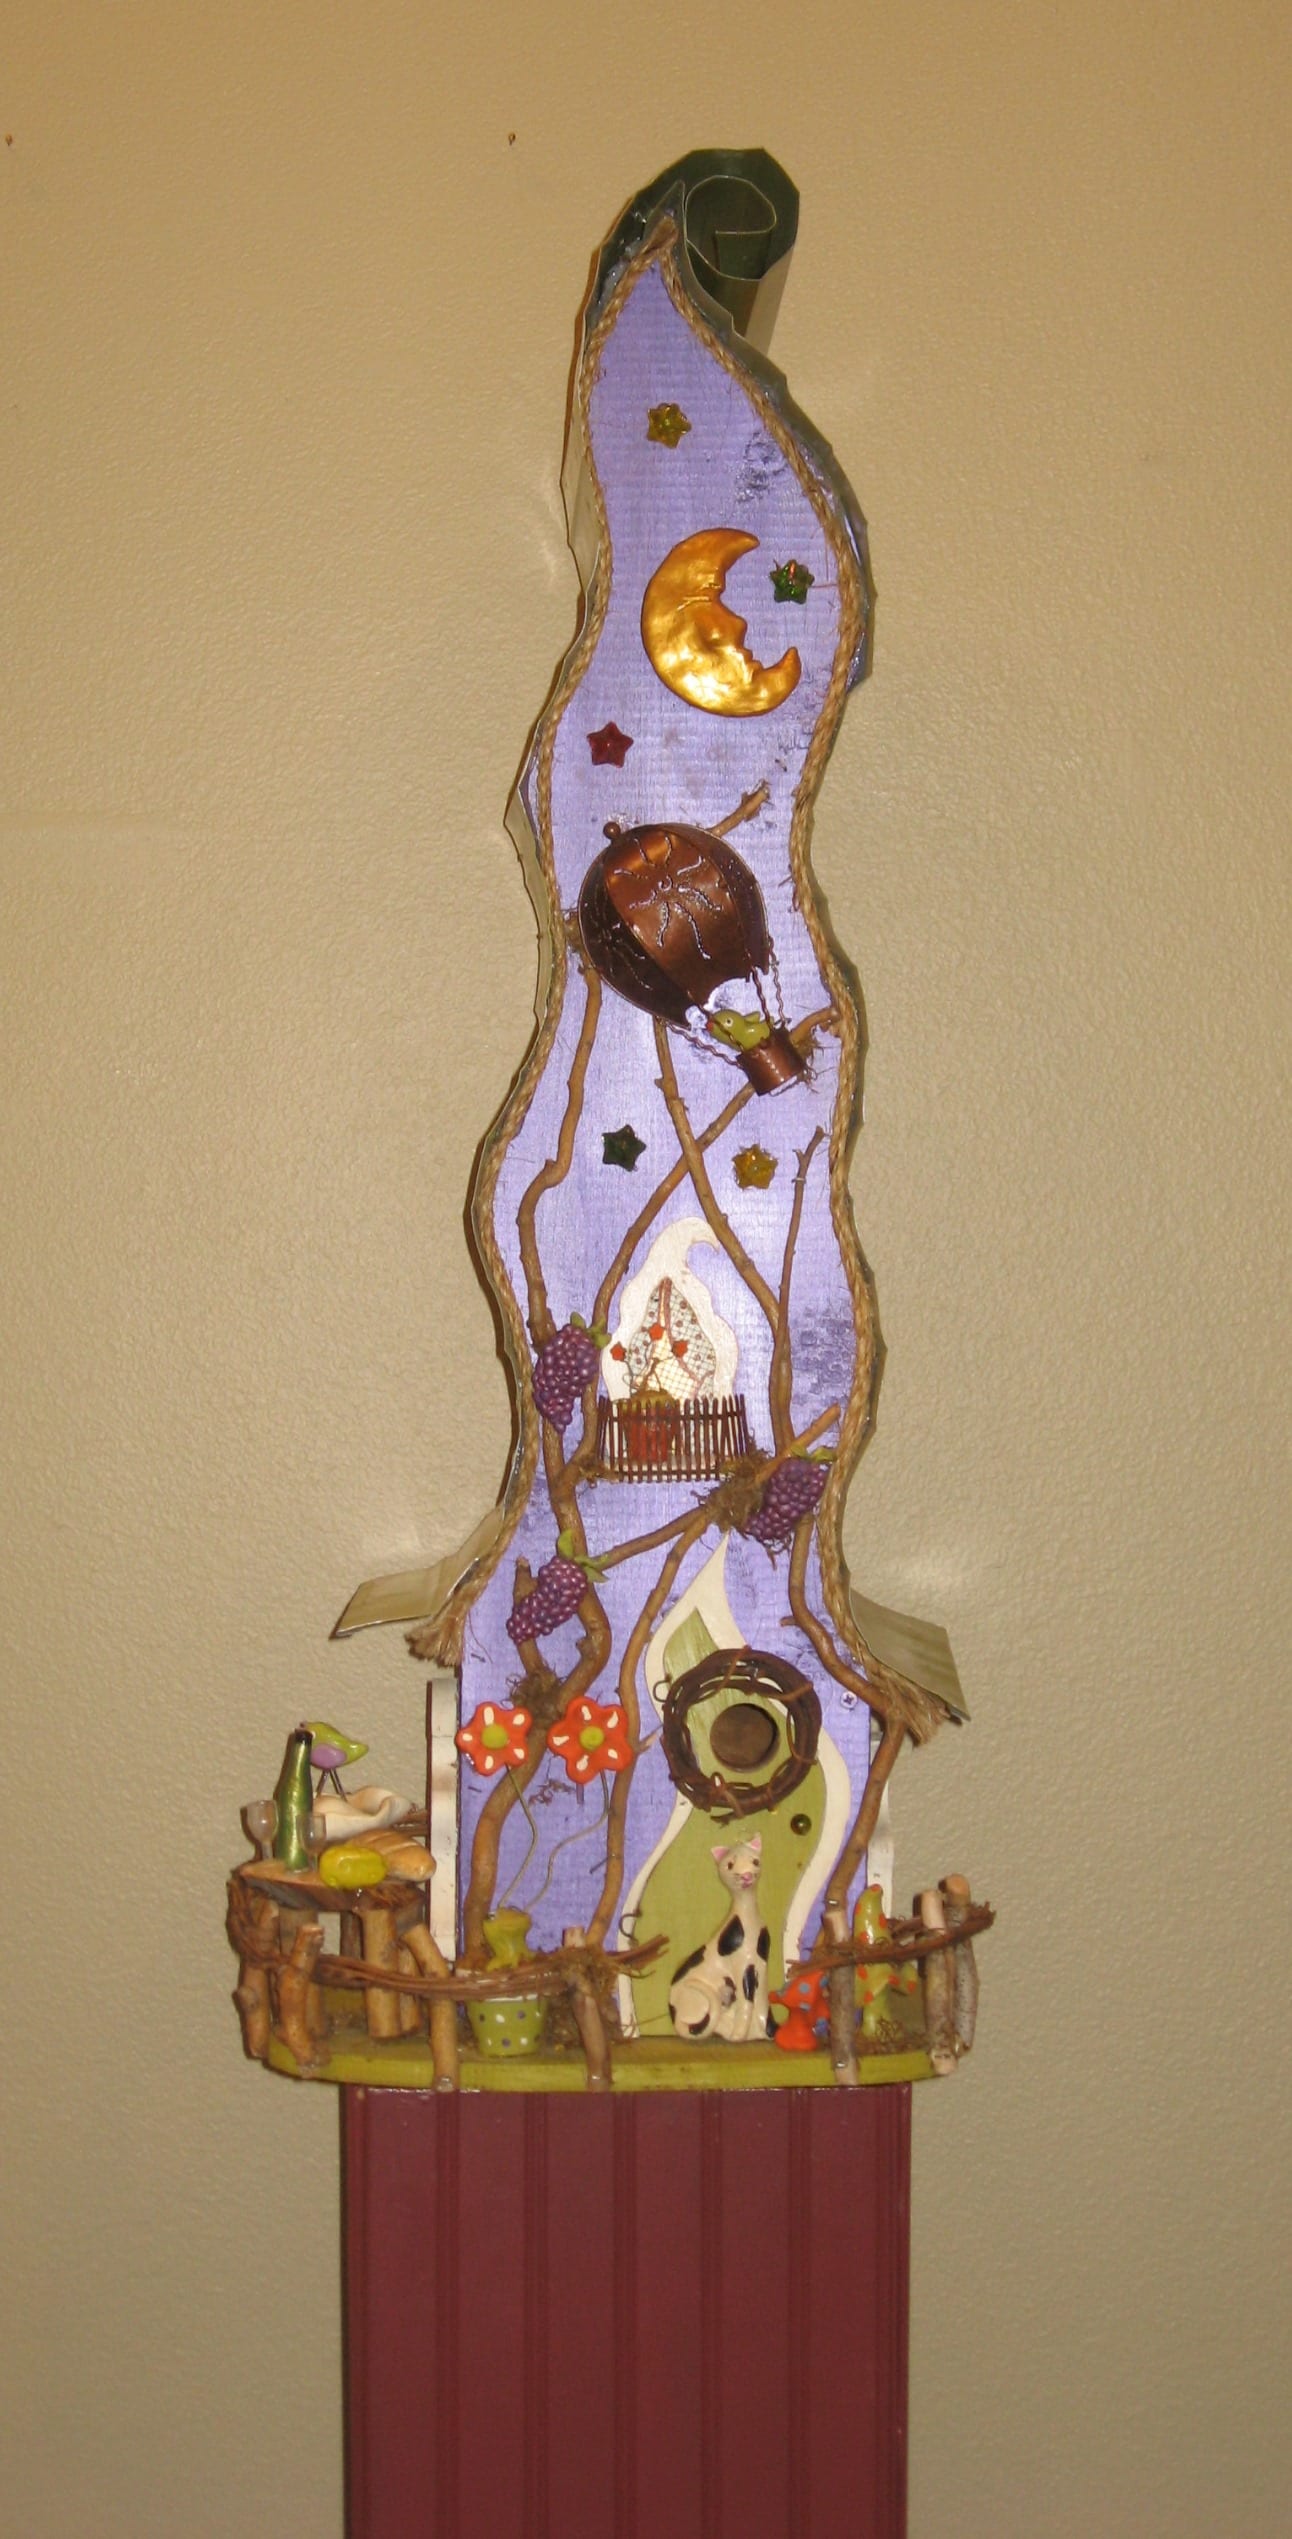 Flying high with wineglasses birdhouse by wenaha gallery artists papa jon's fly inns